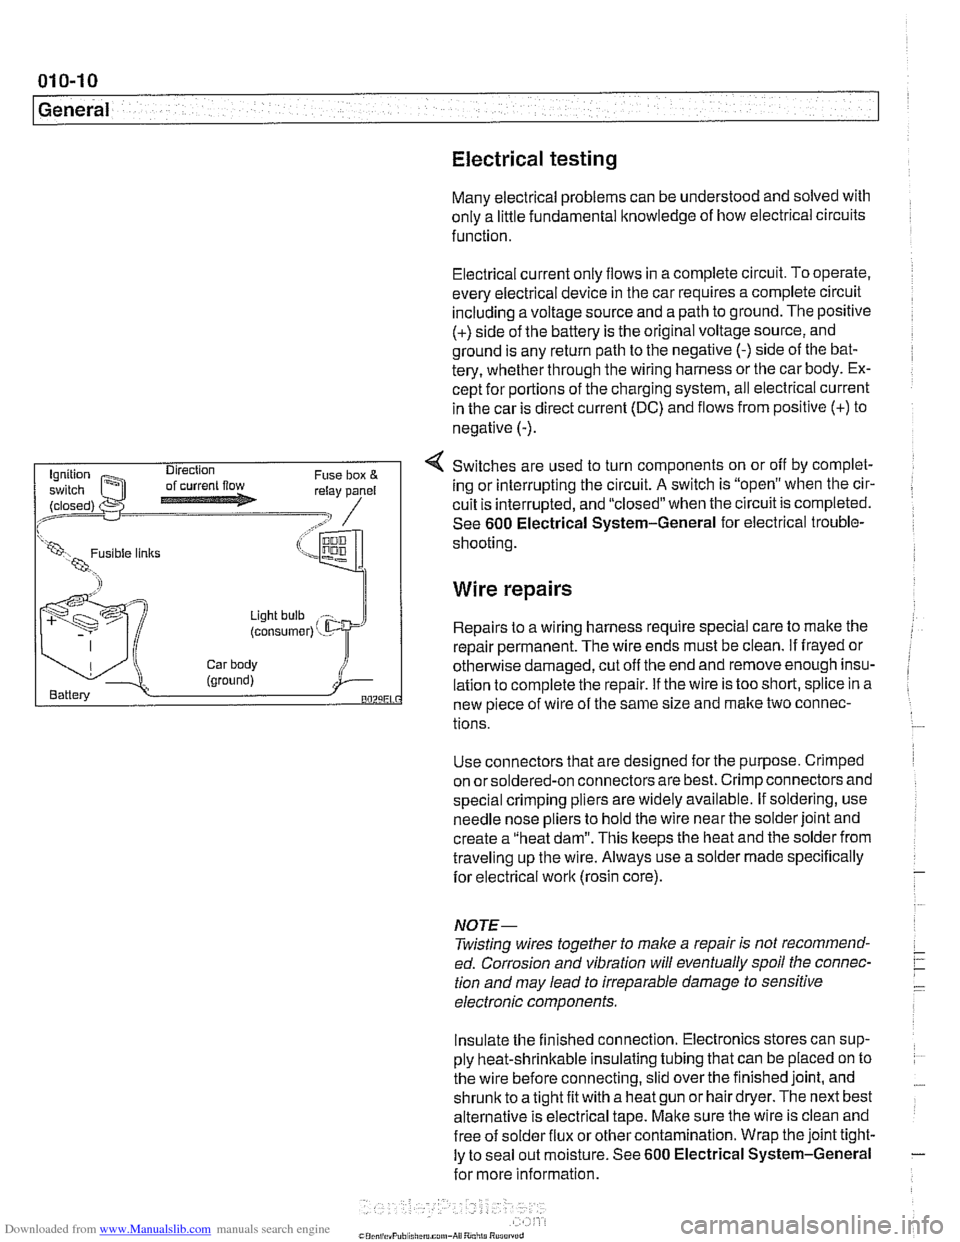 BMW 528i 1999 E39 Workshop Manual Downloaded from www.Manualslib.com manuals search engine 
01 0-1 0 
General 
Electrical testing 
Many electrical problems  can be understood and solved with 
only a little fundamental  knowledge  of h